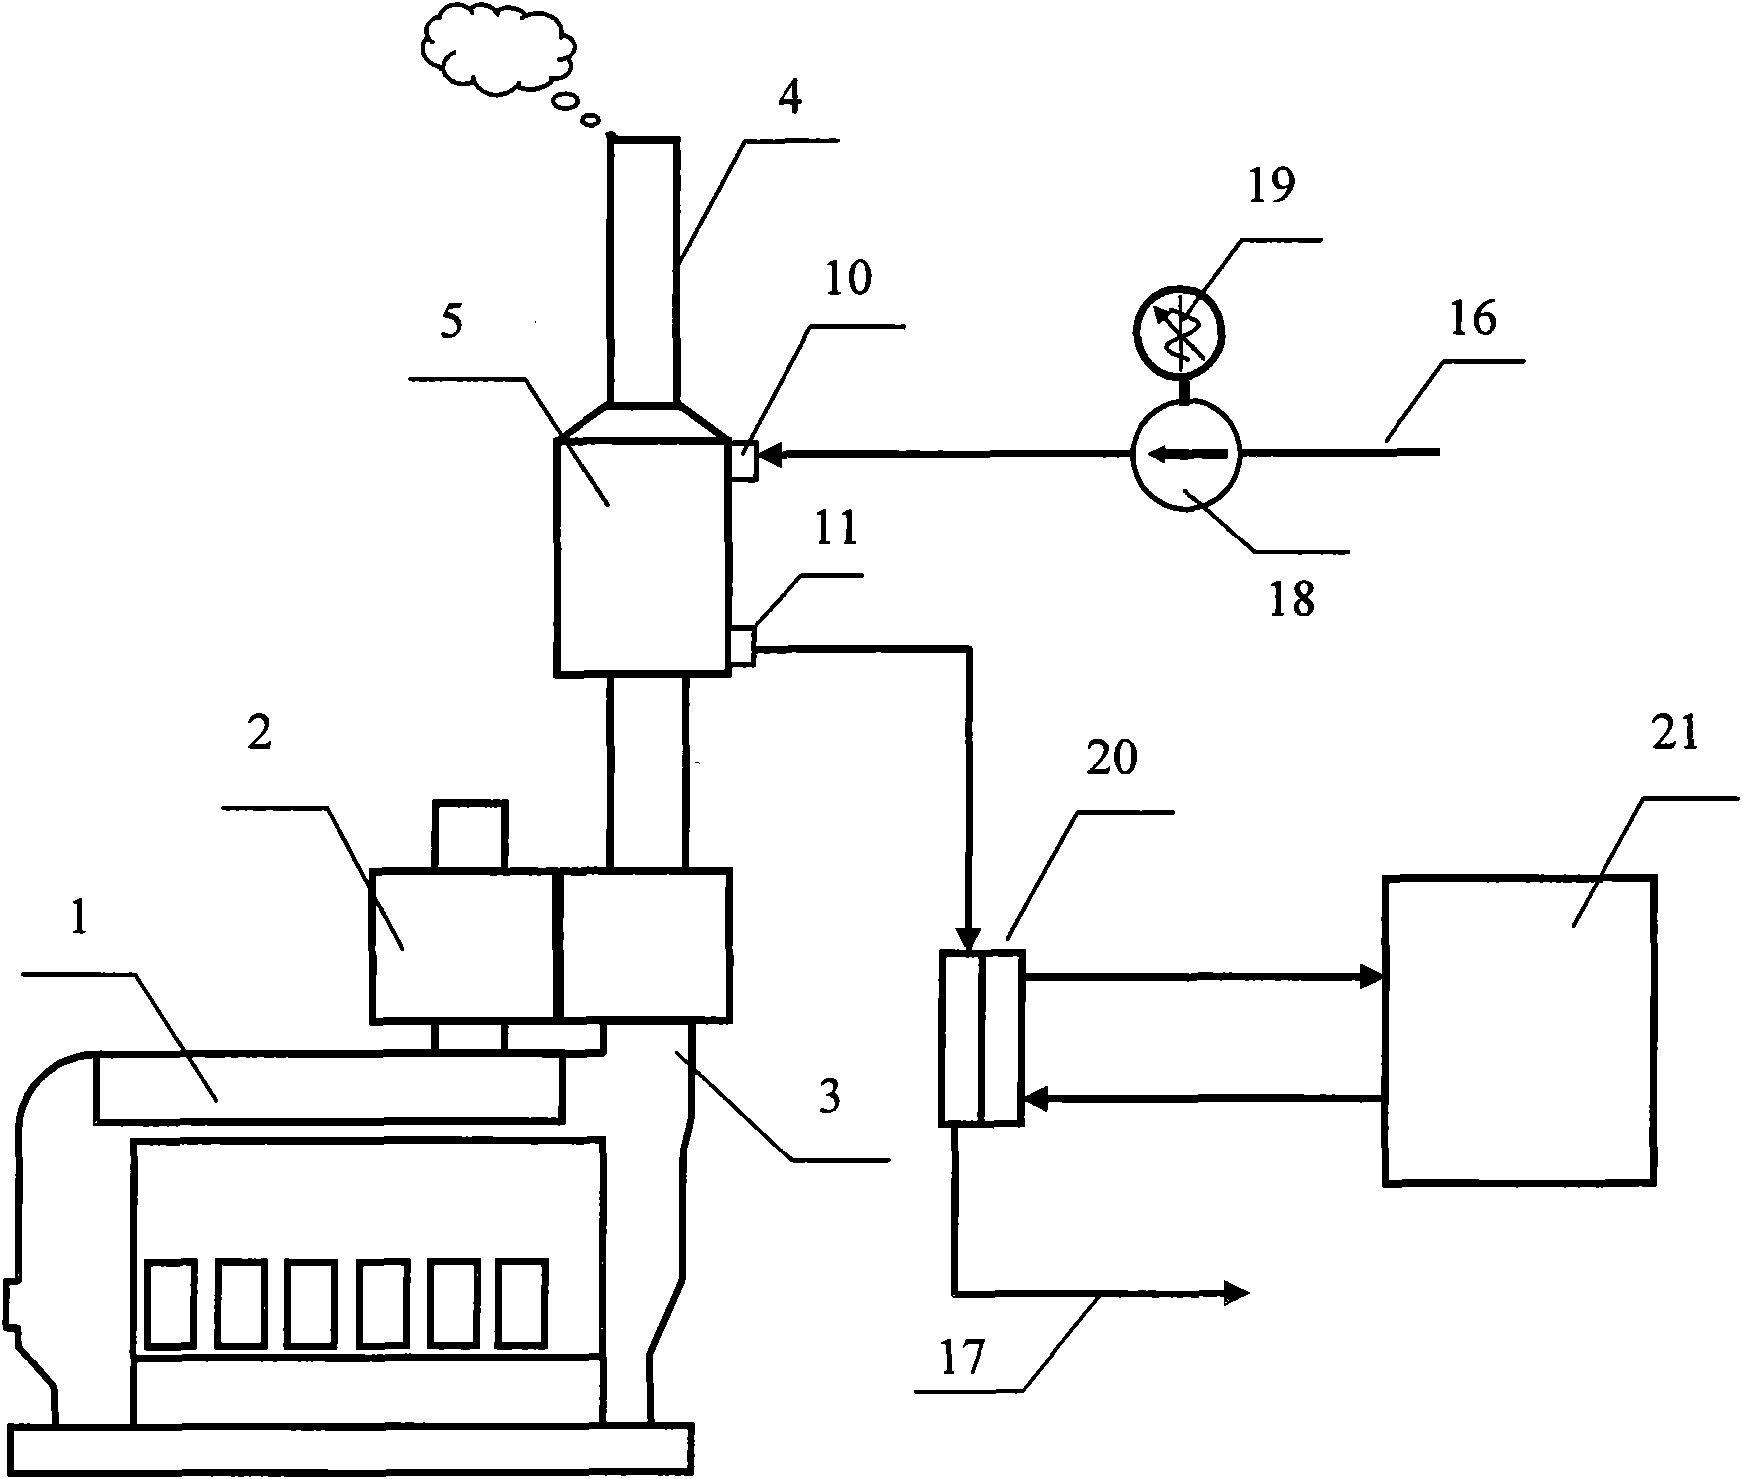 Method, device and system for optimizing exhaust back pressure of internal combustion engine